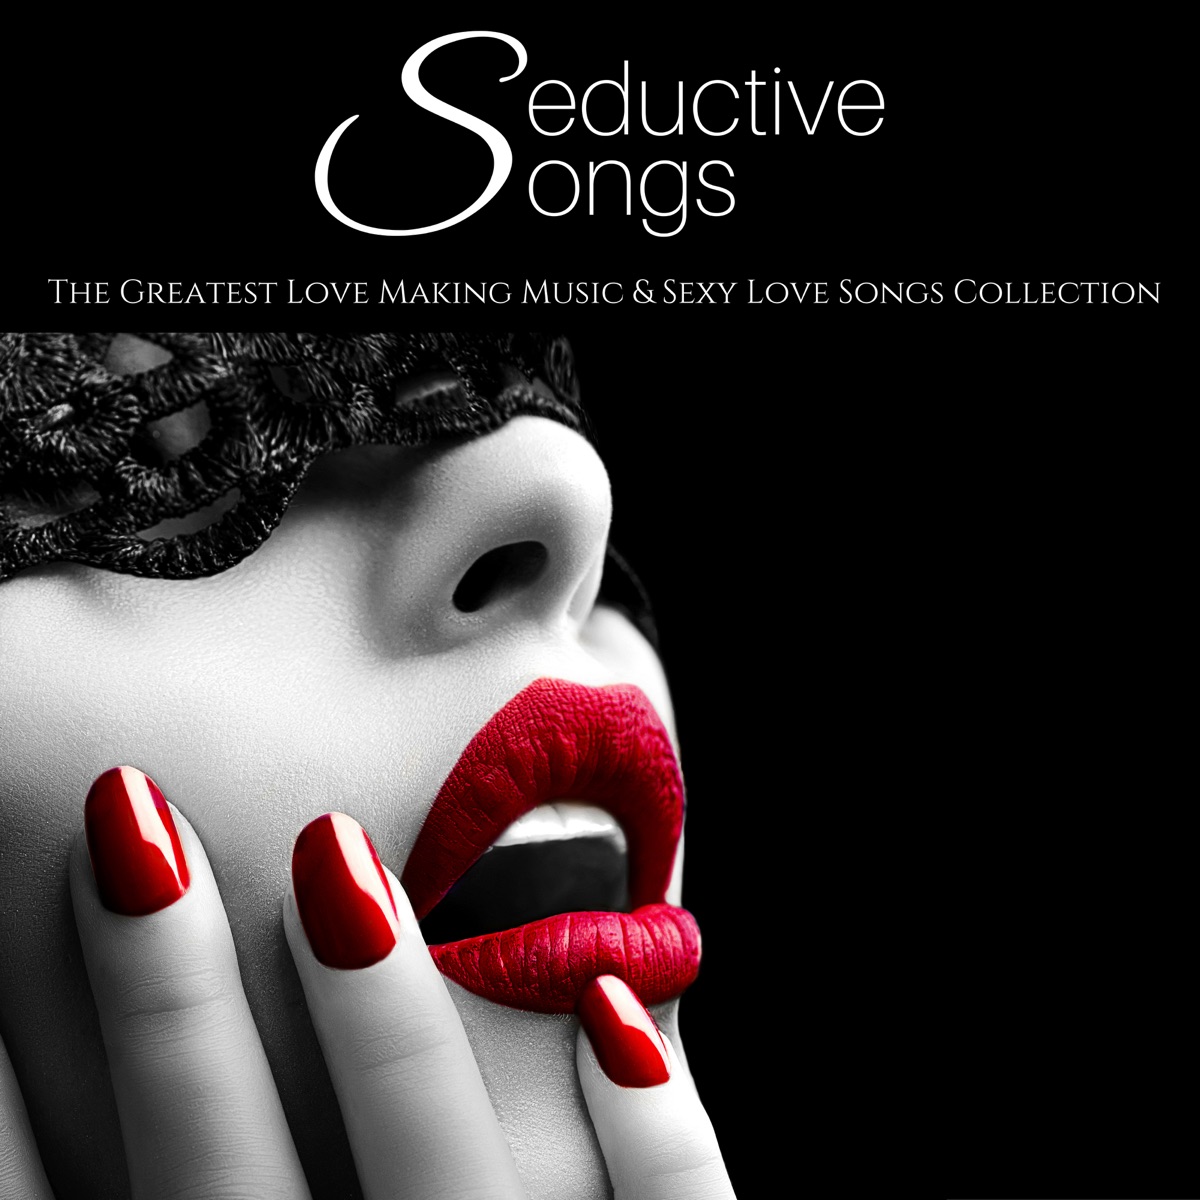 Seductive Songs - The Greatest Love Making Music & Sexy Love Songs  Collection by Sexy Music Buddha Love Dj on Apple Music